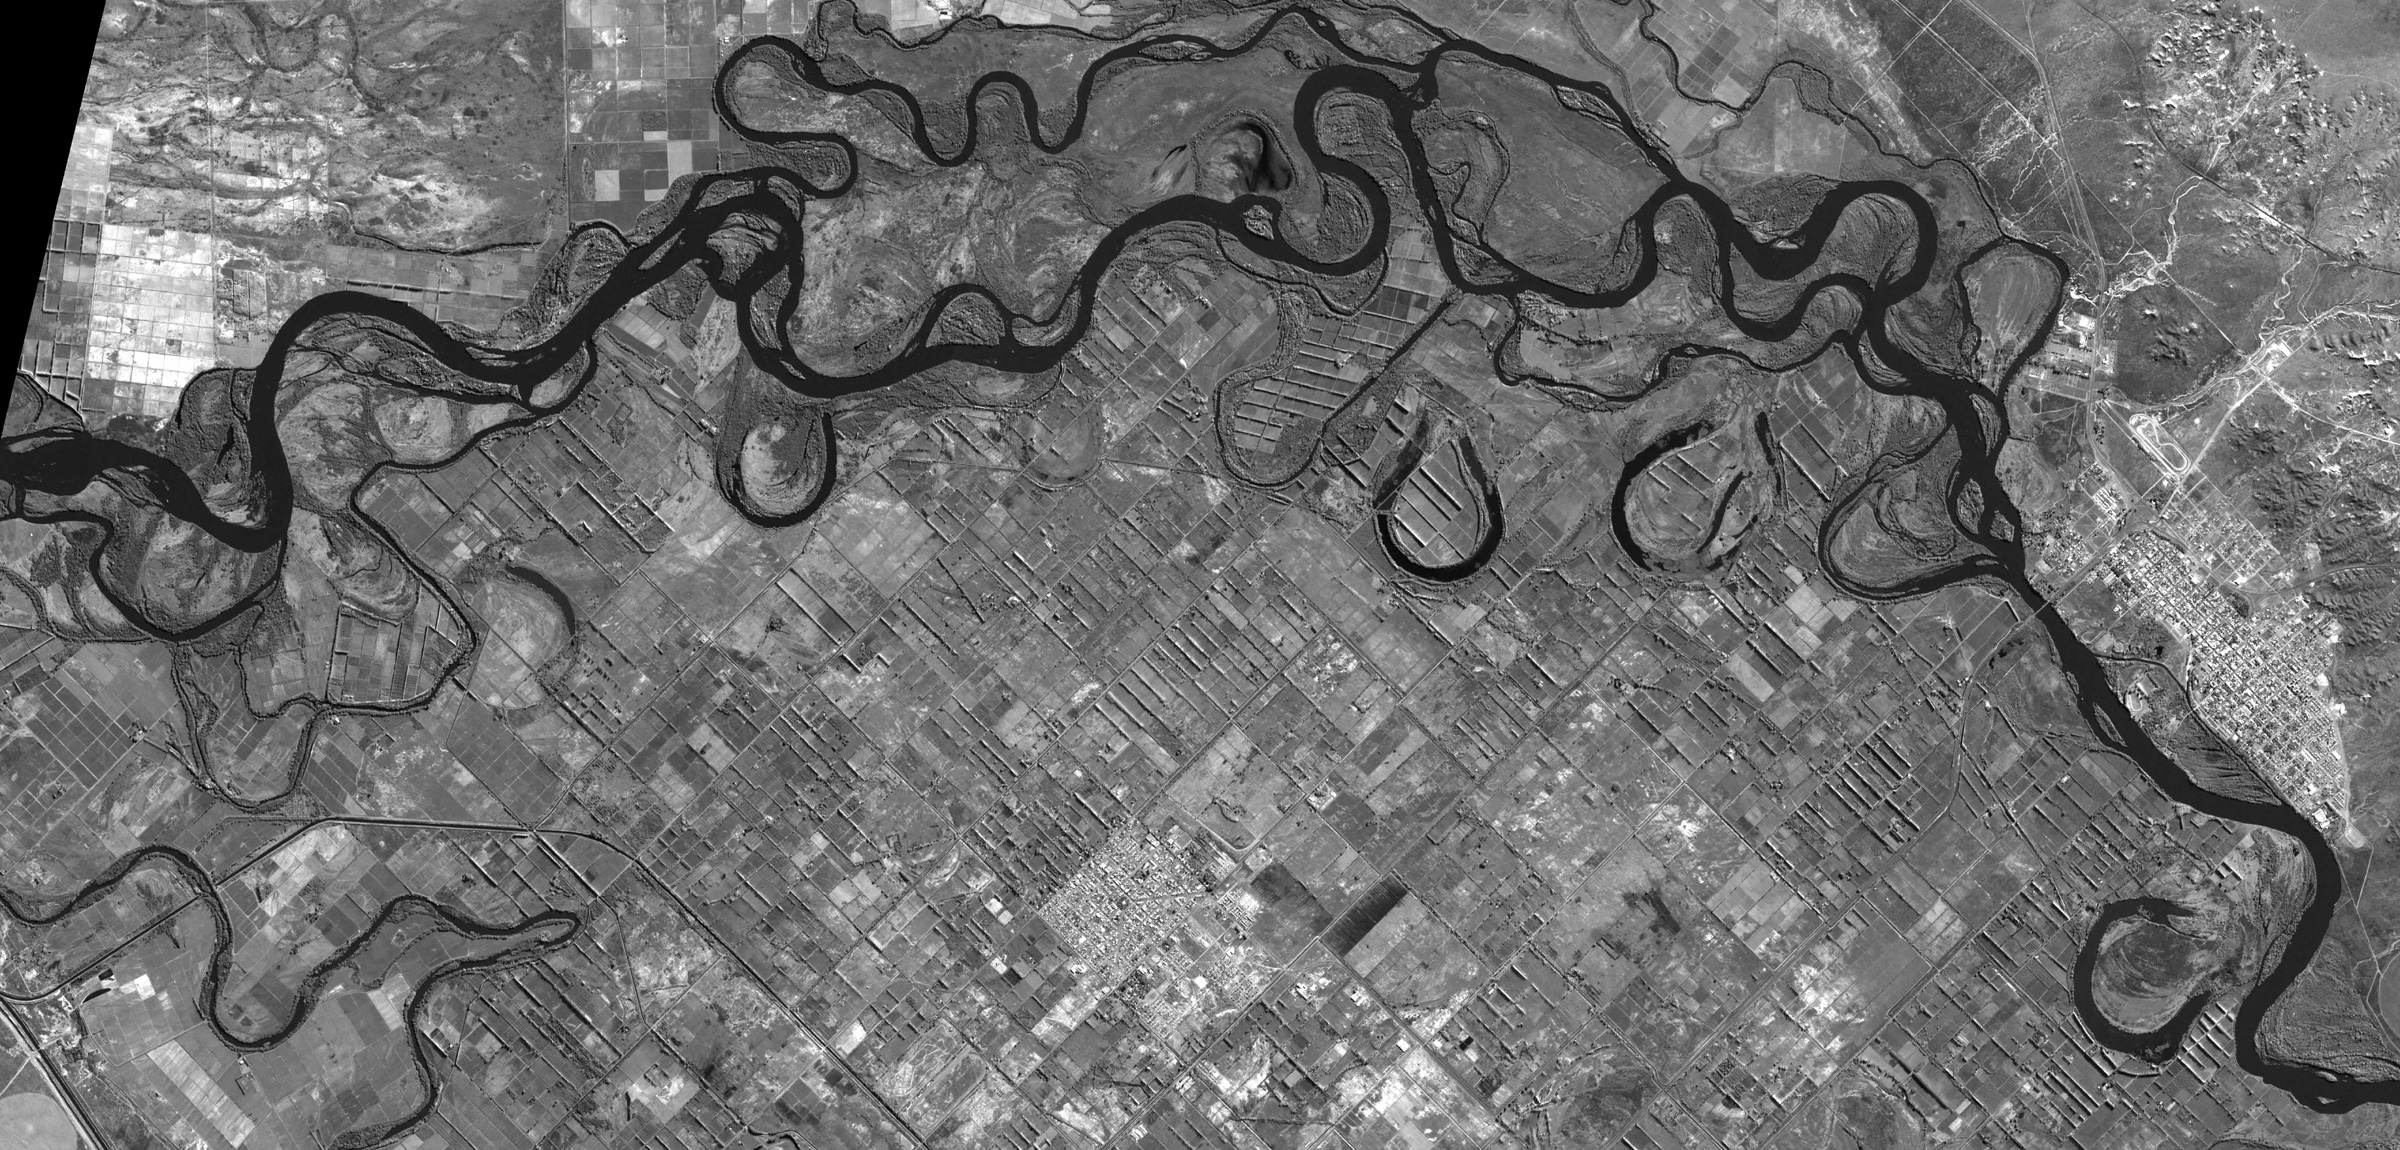 Enlarged Image of Choele-Choel City, Argentina observed by PRISM on Apr. 29, 2006(Pre-disaster).